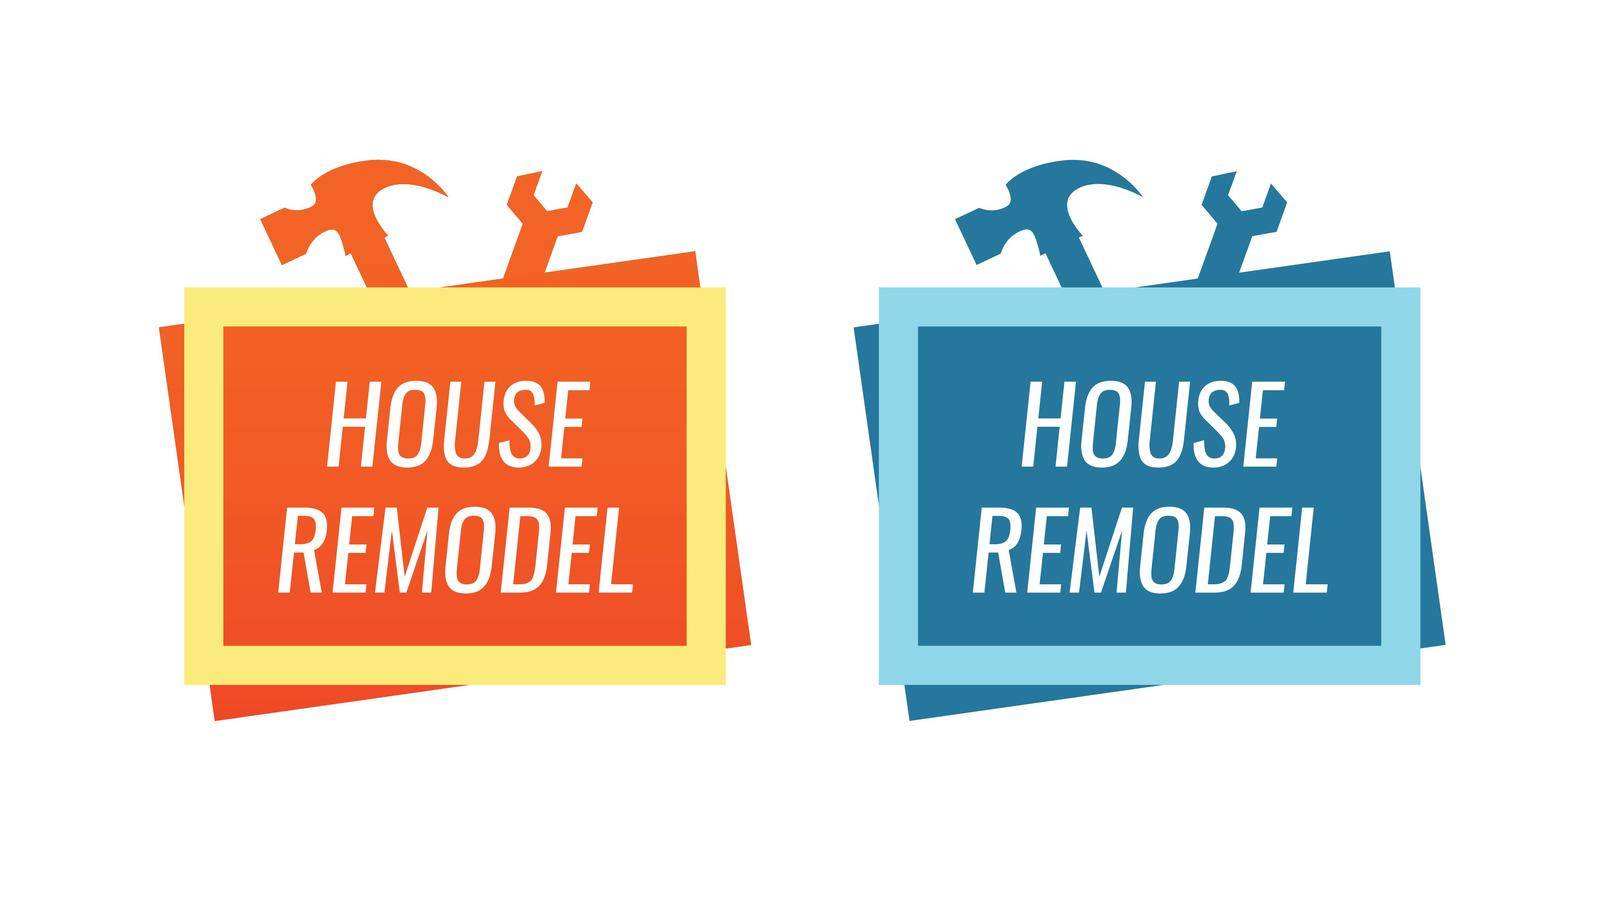 House Remodel - Style Logo for Home Renovation Service